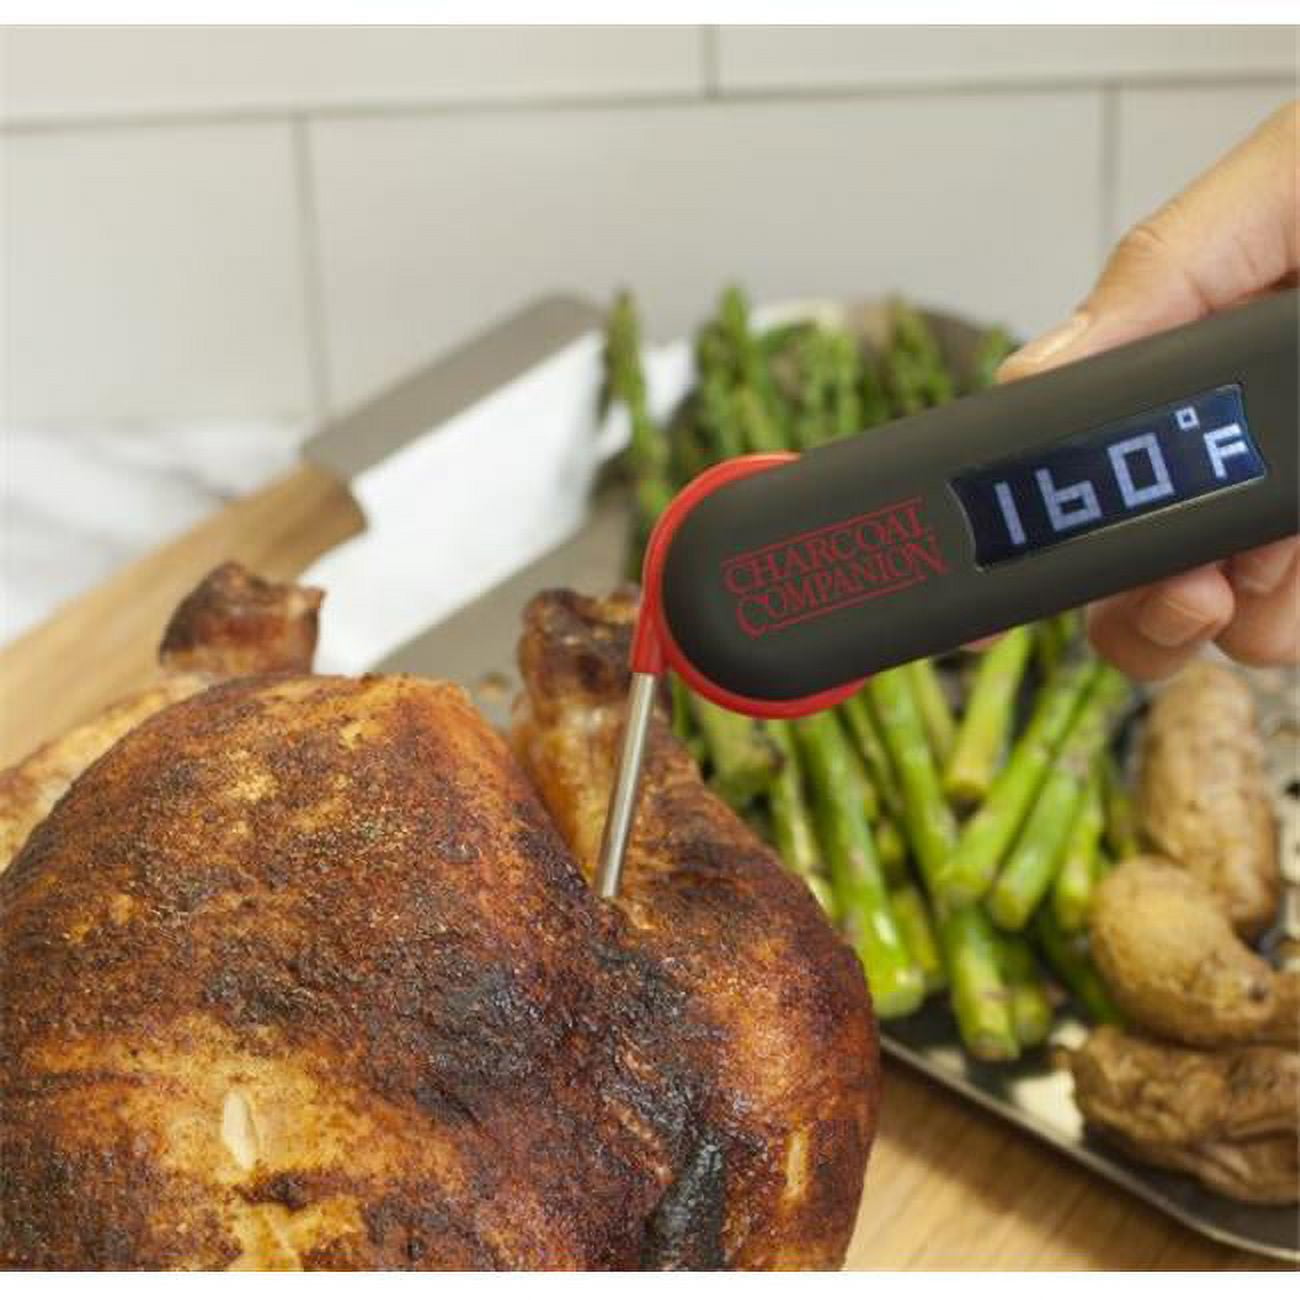 Cc4100 Digital Meat Thermometer